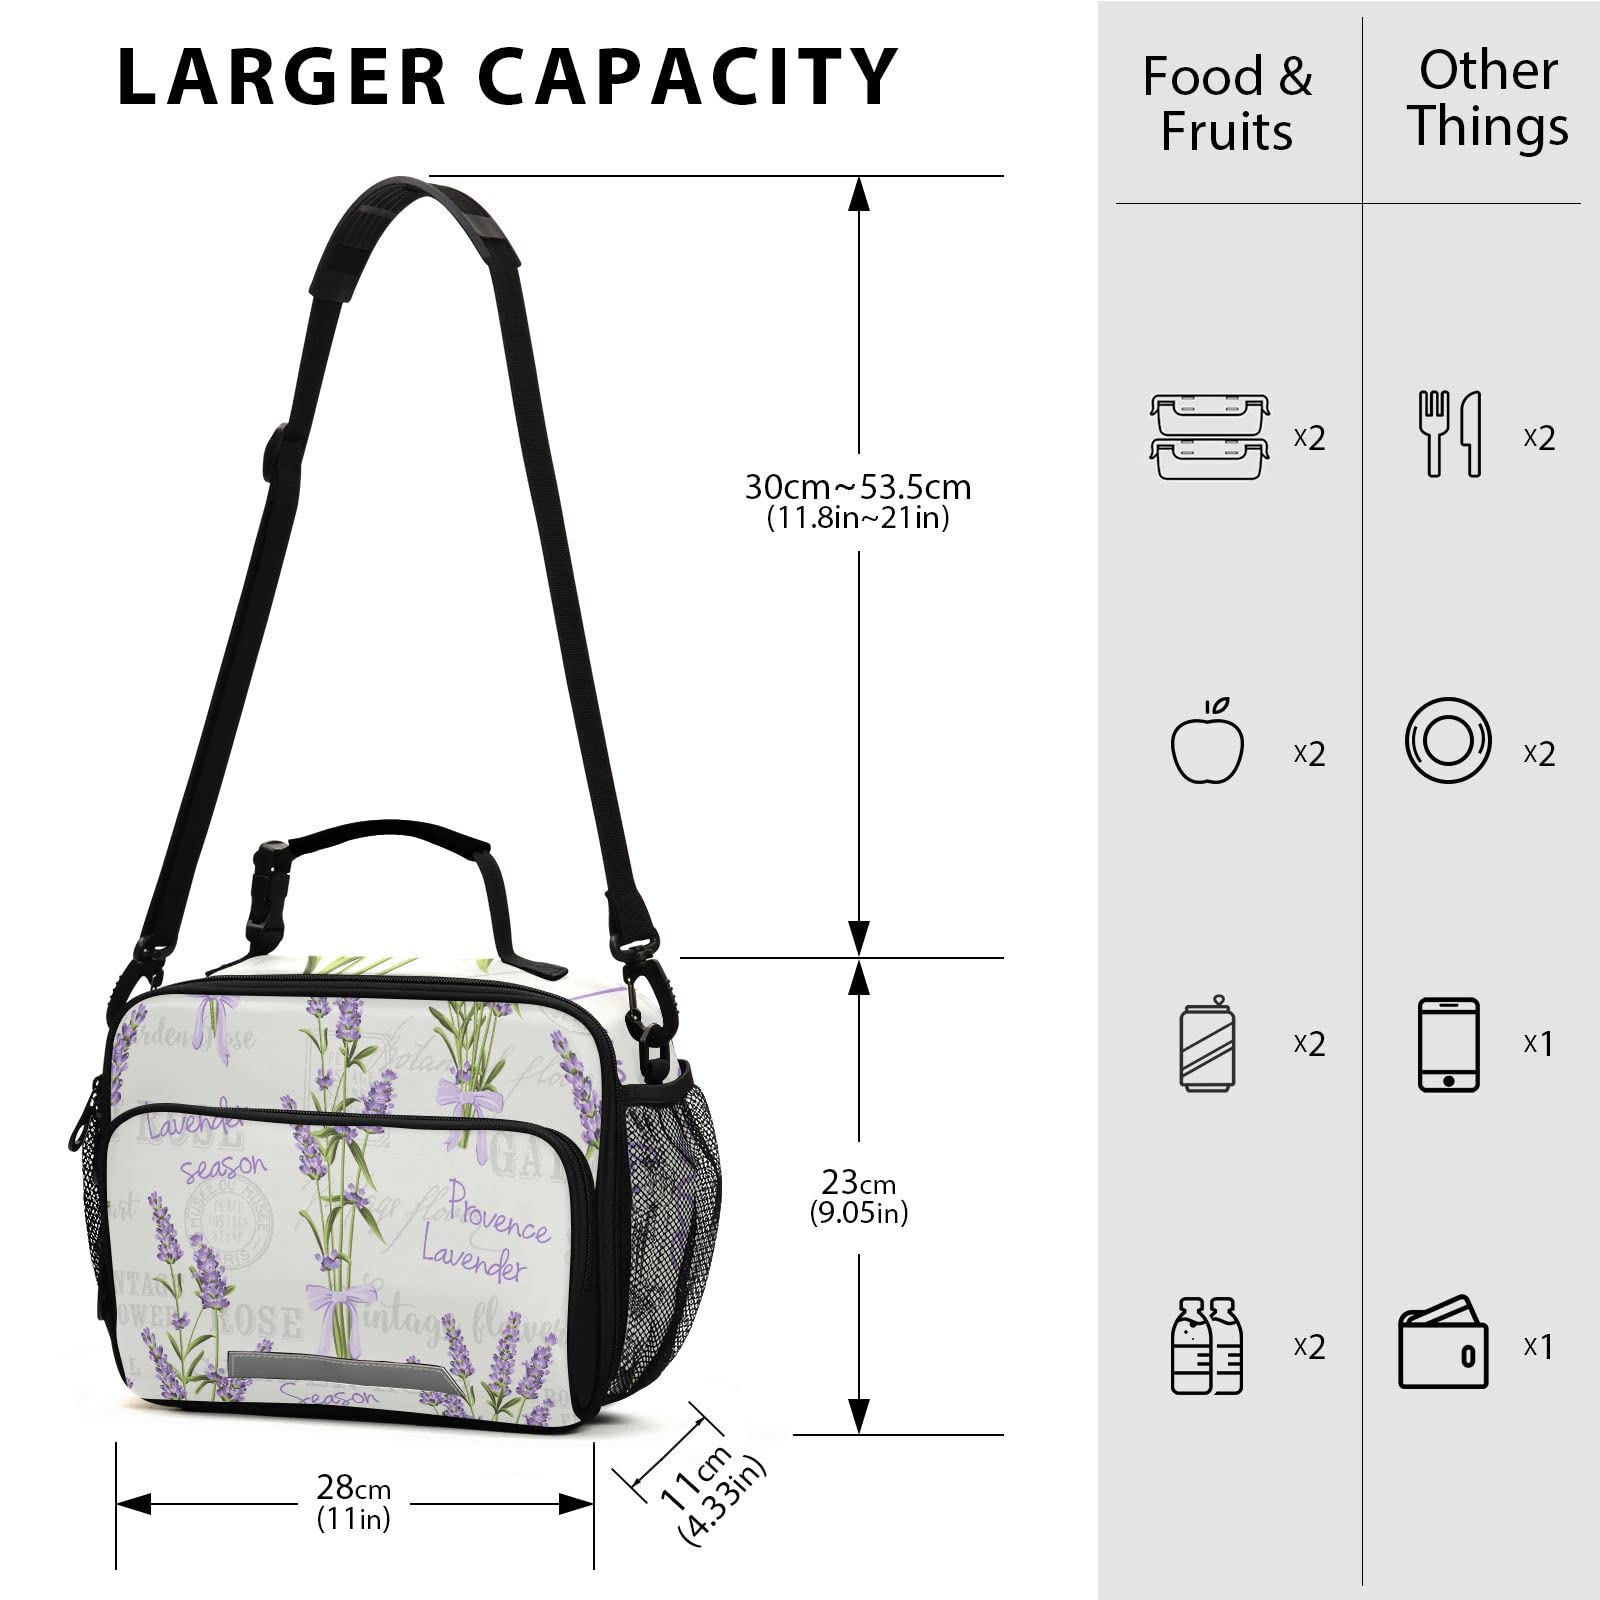 Lavender Flowers Lunch Bag for Kids Insulated Lunch Box for School Picnic Hiking Lightweright Reusable Lunch Tote Bag with Adjustable Shoulder Strap for Boys Girls